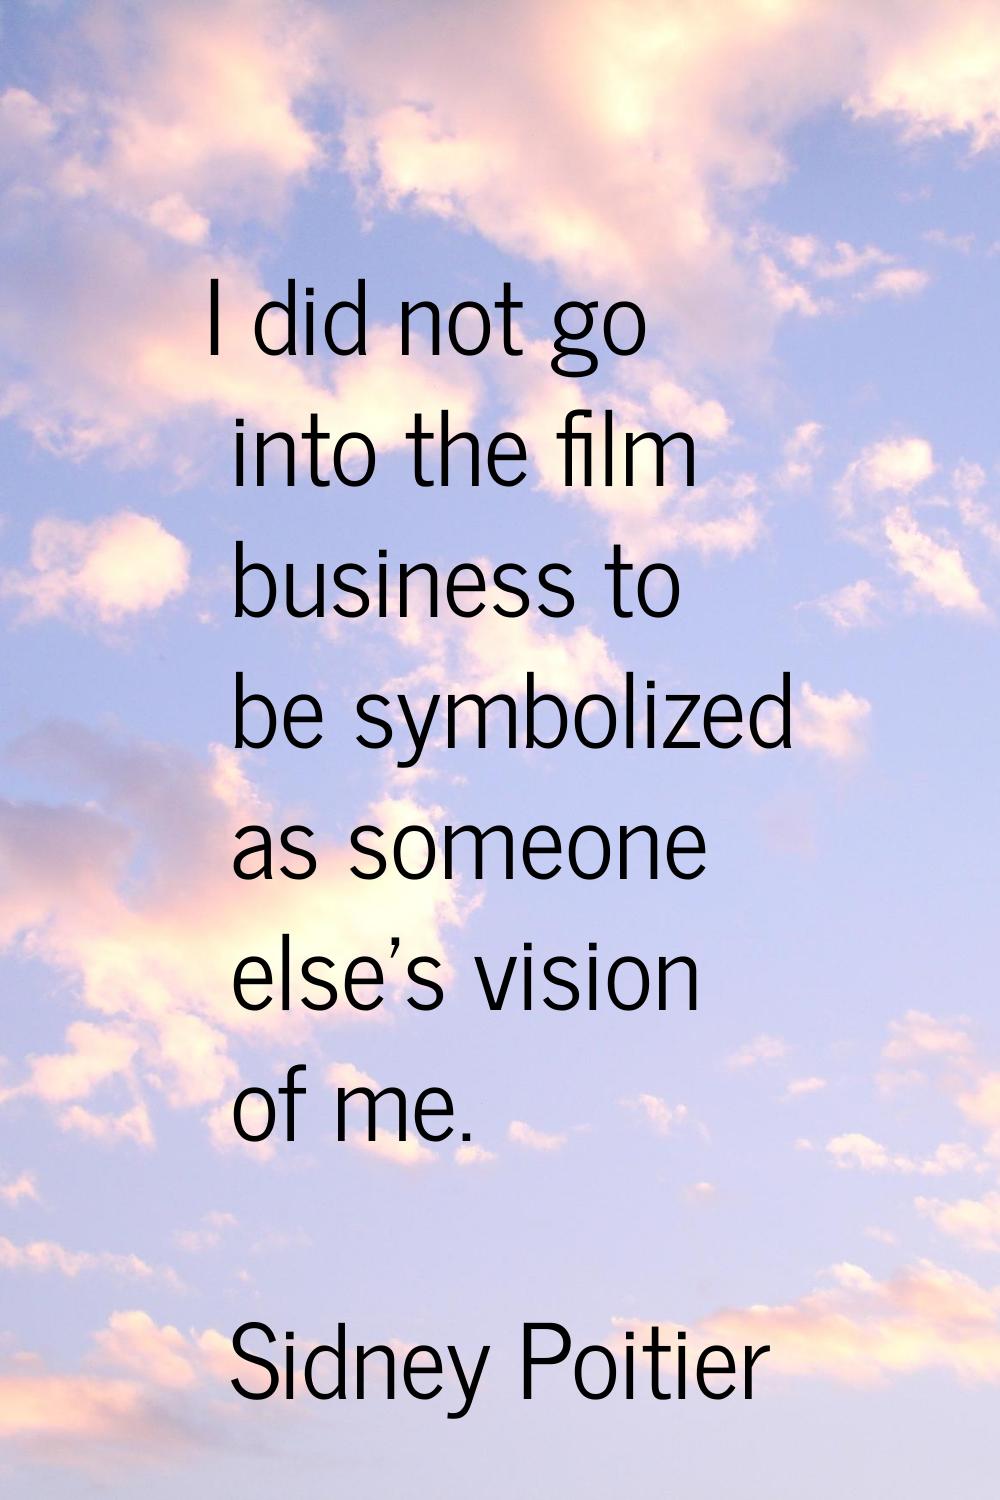 I did not go into the film business to be symbolized as someone else's vision of me.